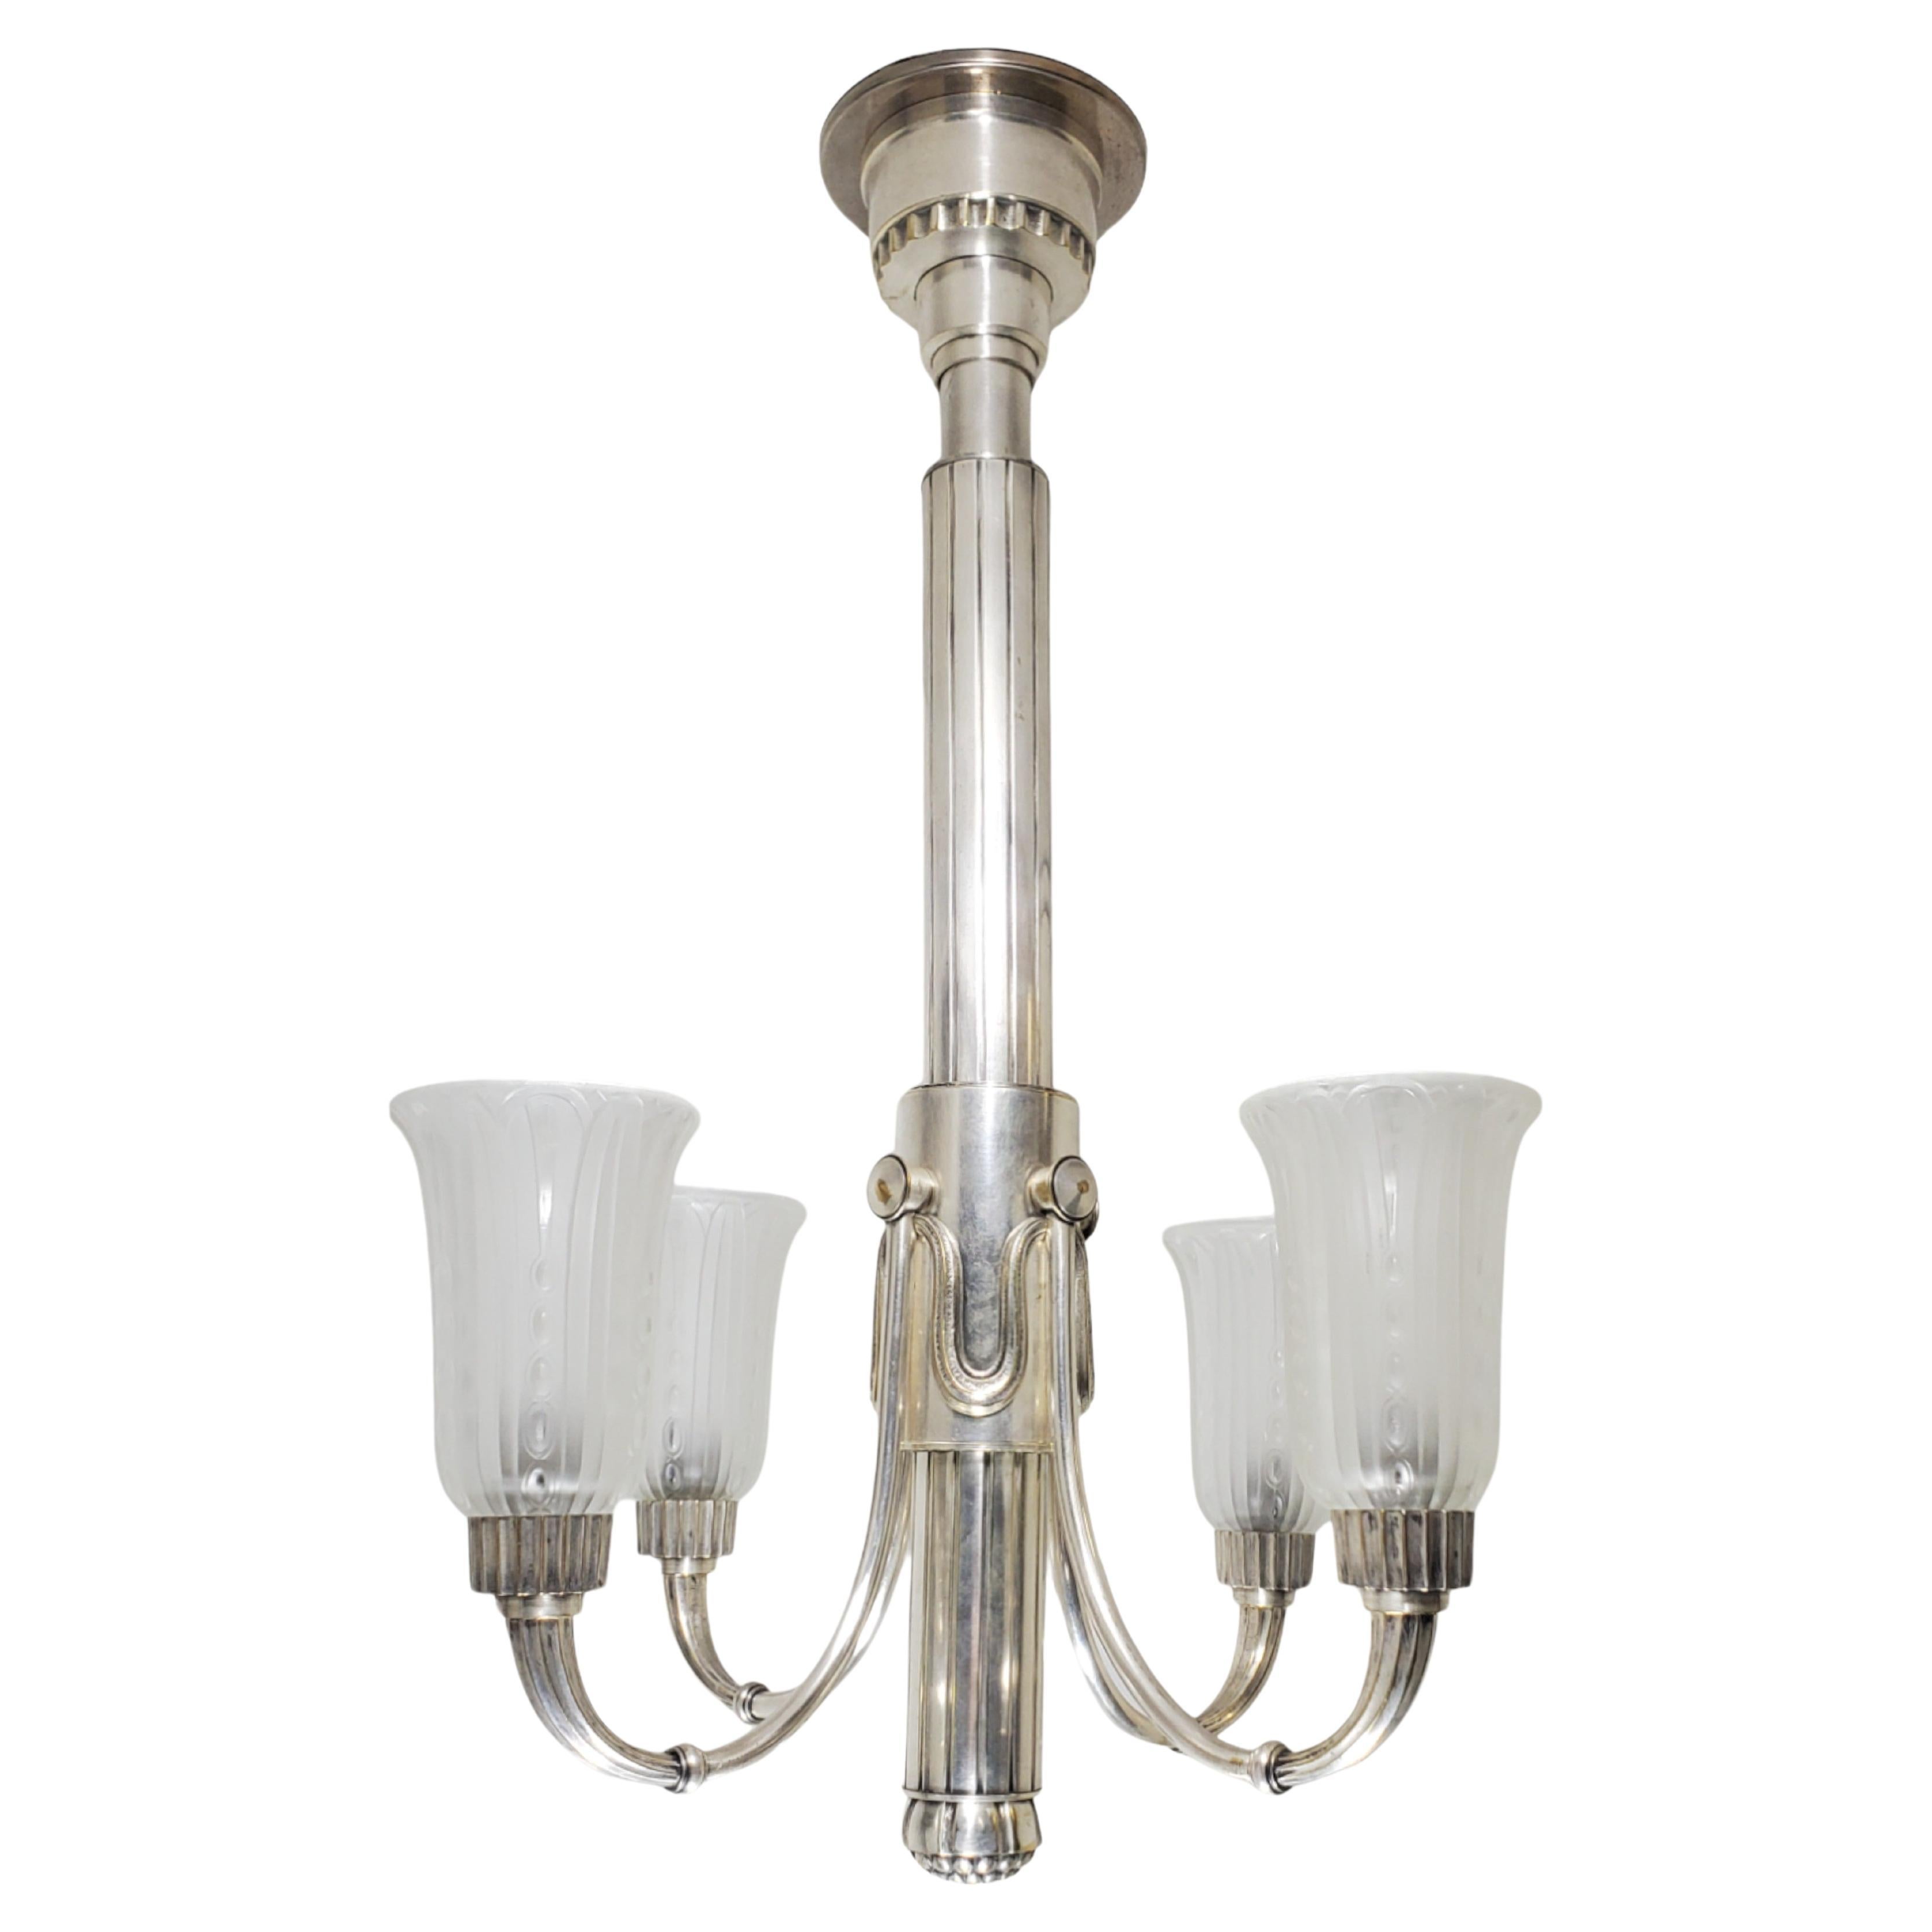 Original Leleu silvered bronze 4 arm chandelier w/ frosted art glass tulips For Sale